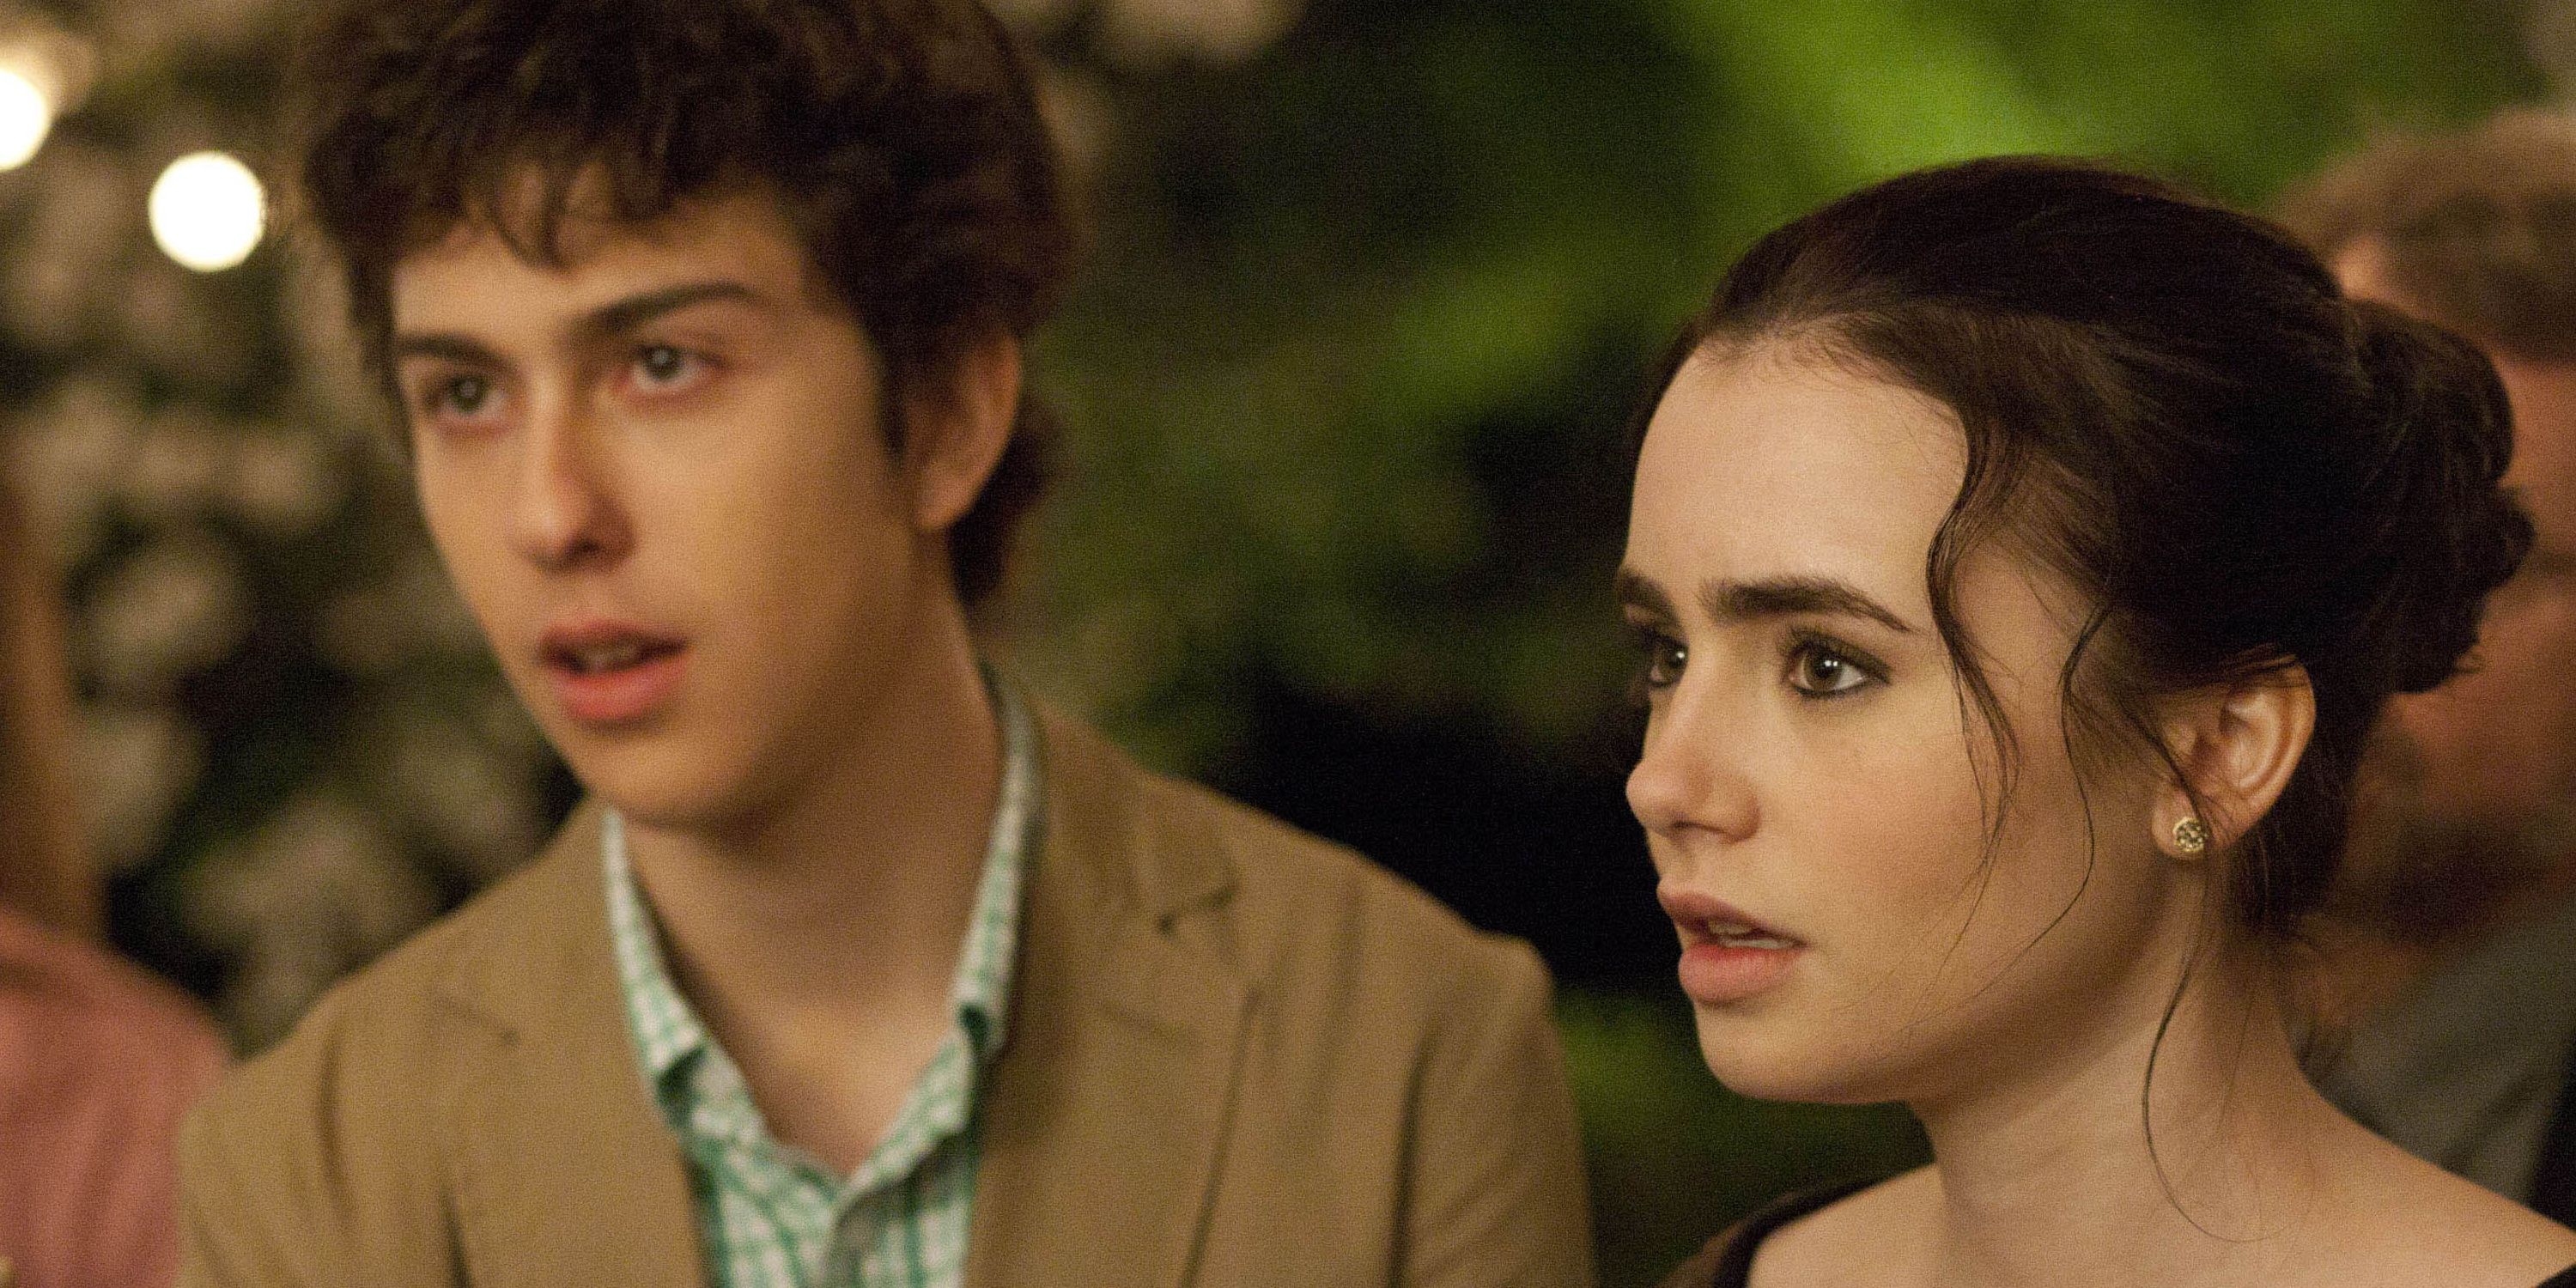 Rusty and Sam look alarmed at a party in Stuck in Love.